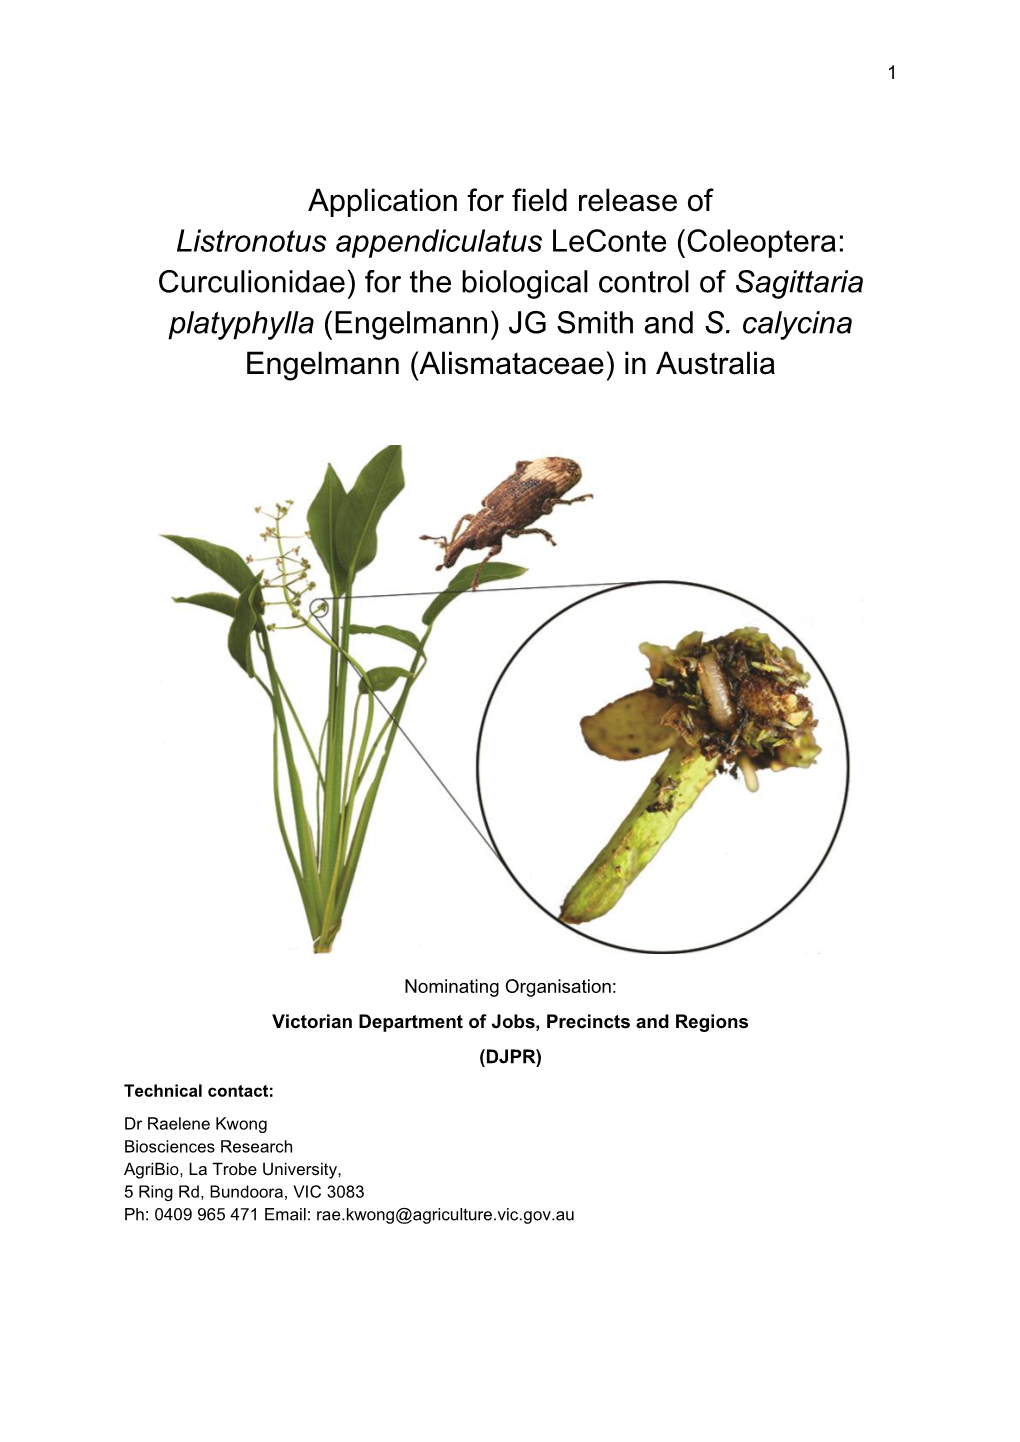 Application for Field Release of Listronotus Appendiculatus Leconte